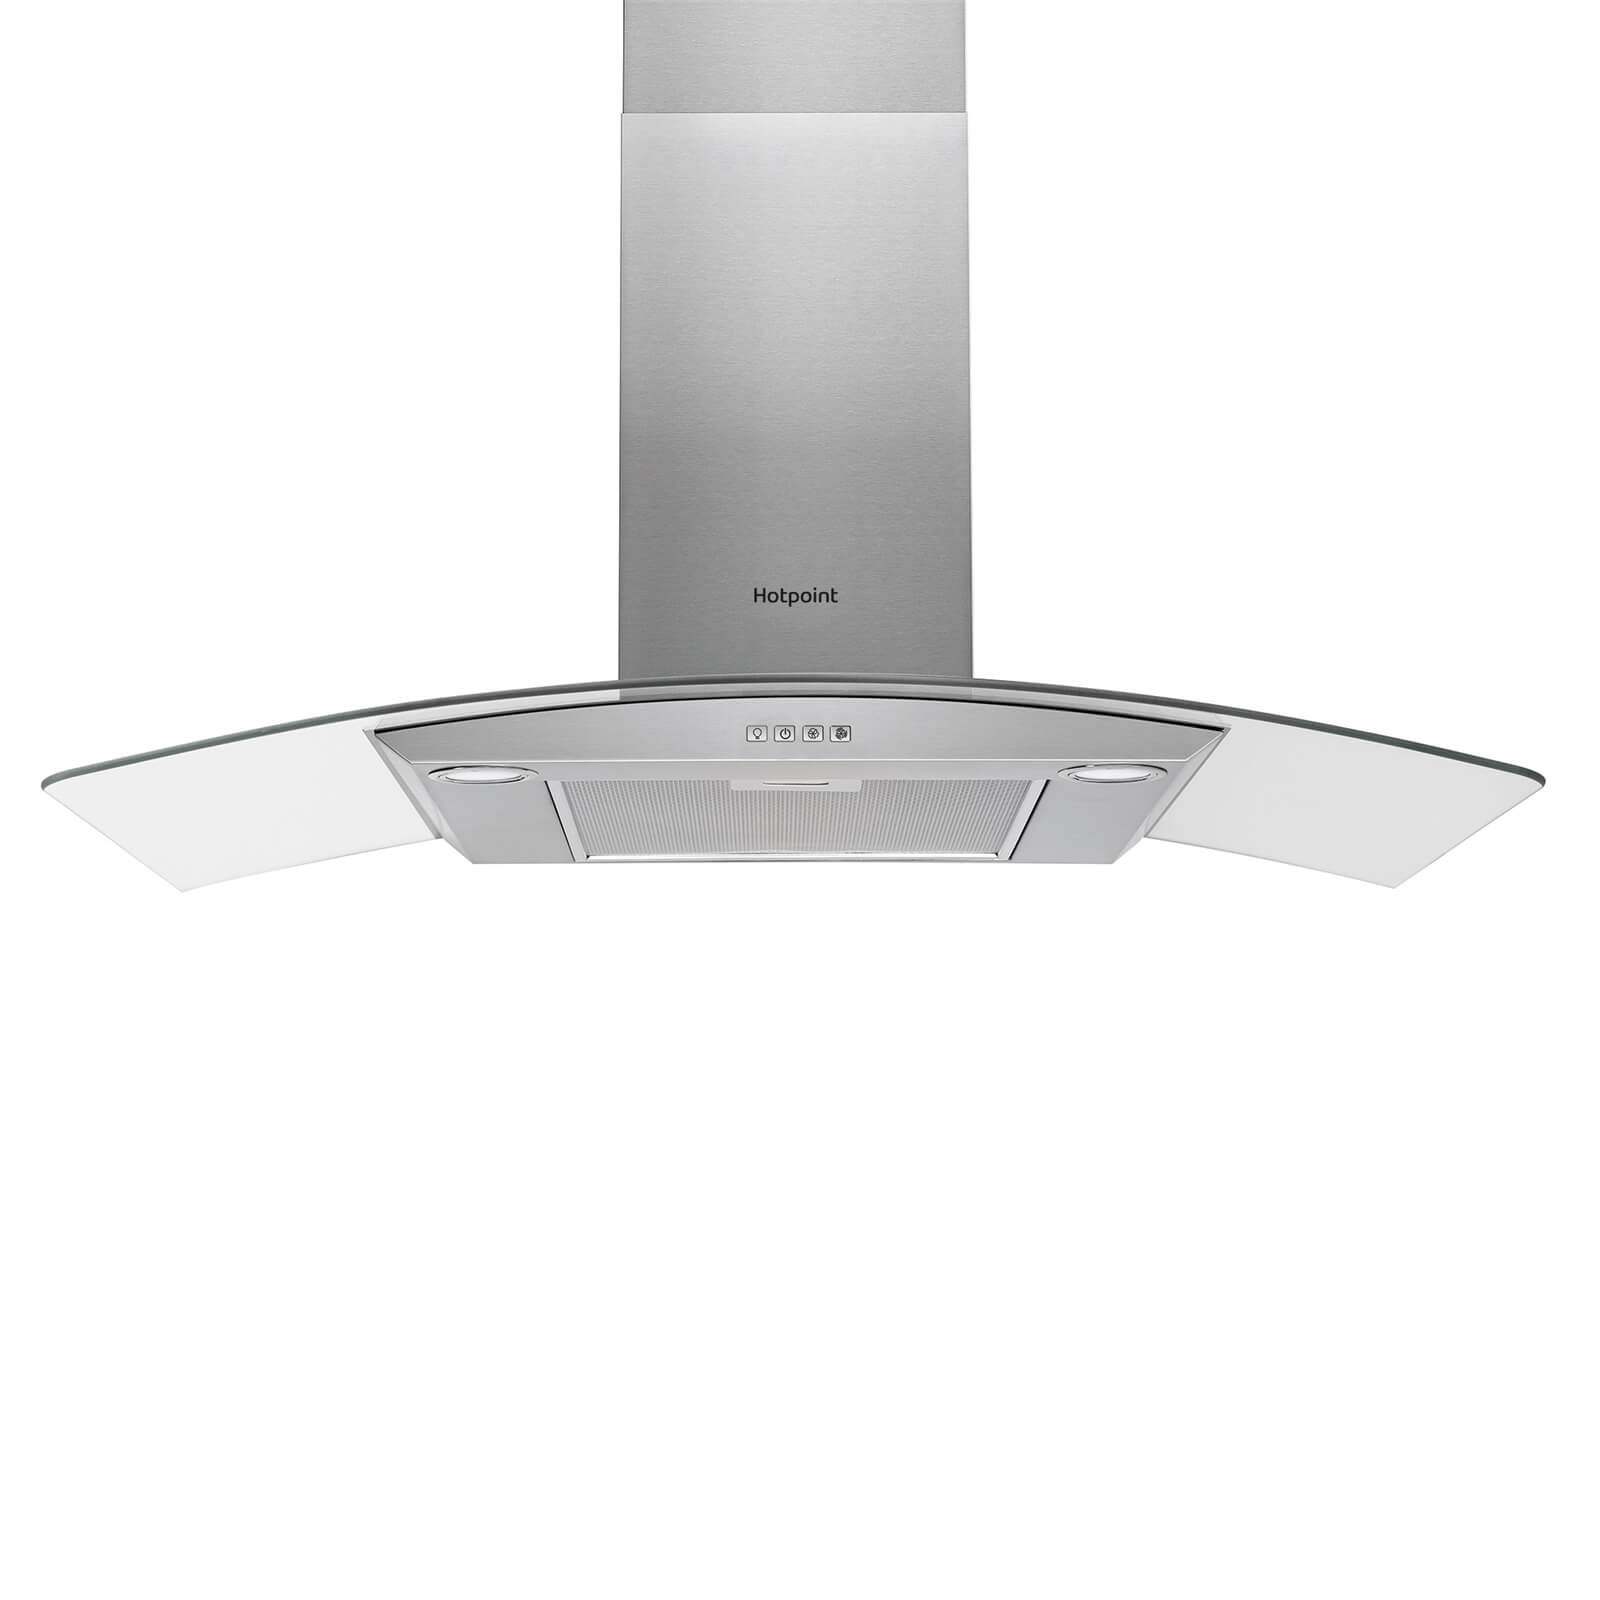 Hotpoint Newstyle PHGC9.4FLMX Curved Glass Chimney Cooker Hood - 90cm - Stainless Steel